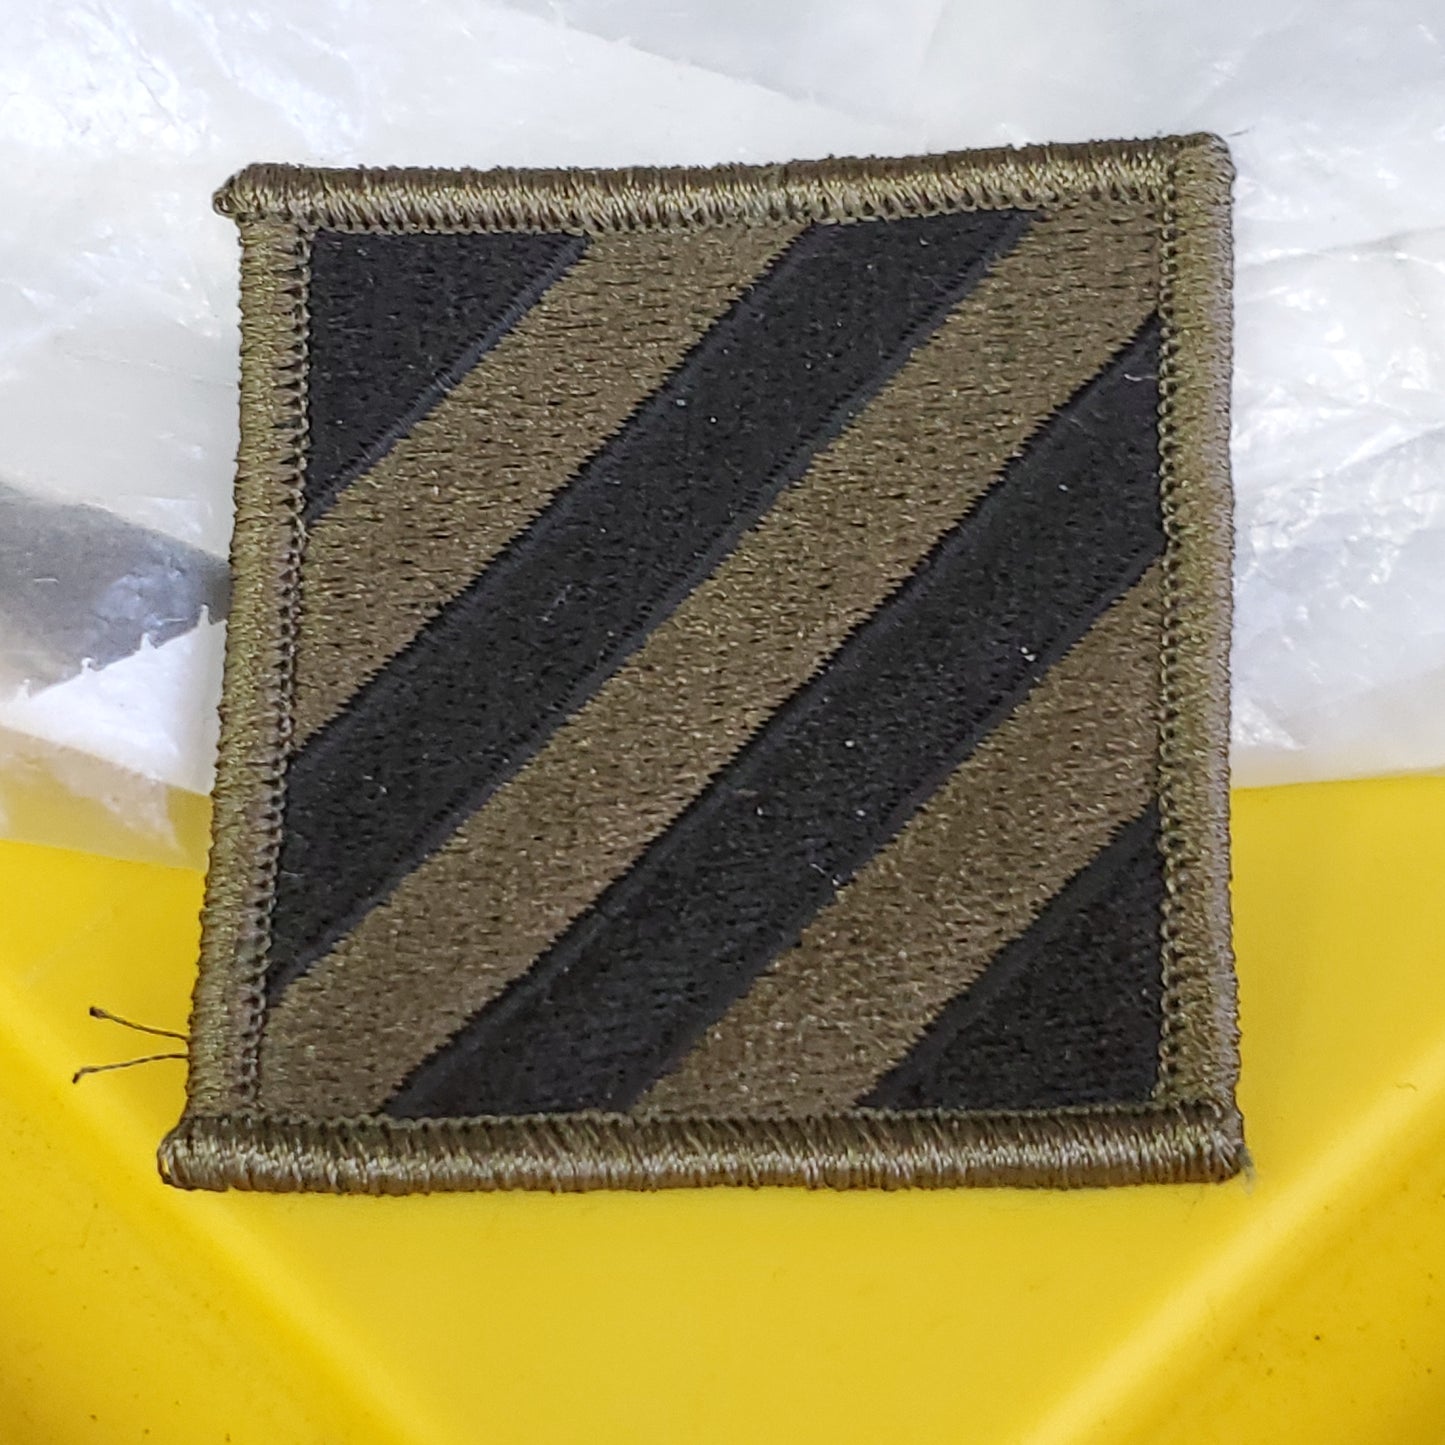 VINTAGE US Army 3RD INFANTRY DIVISION Patch Sew On Subdued OD Black (1odp7)